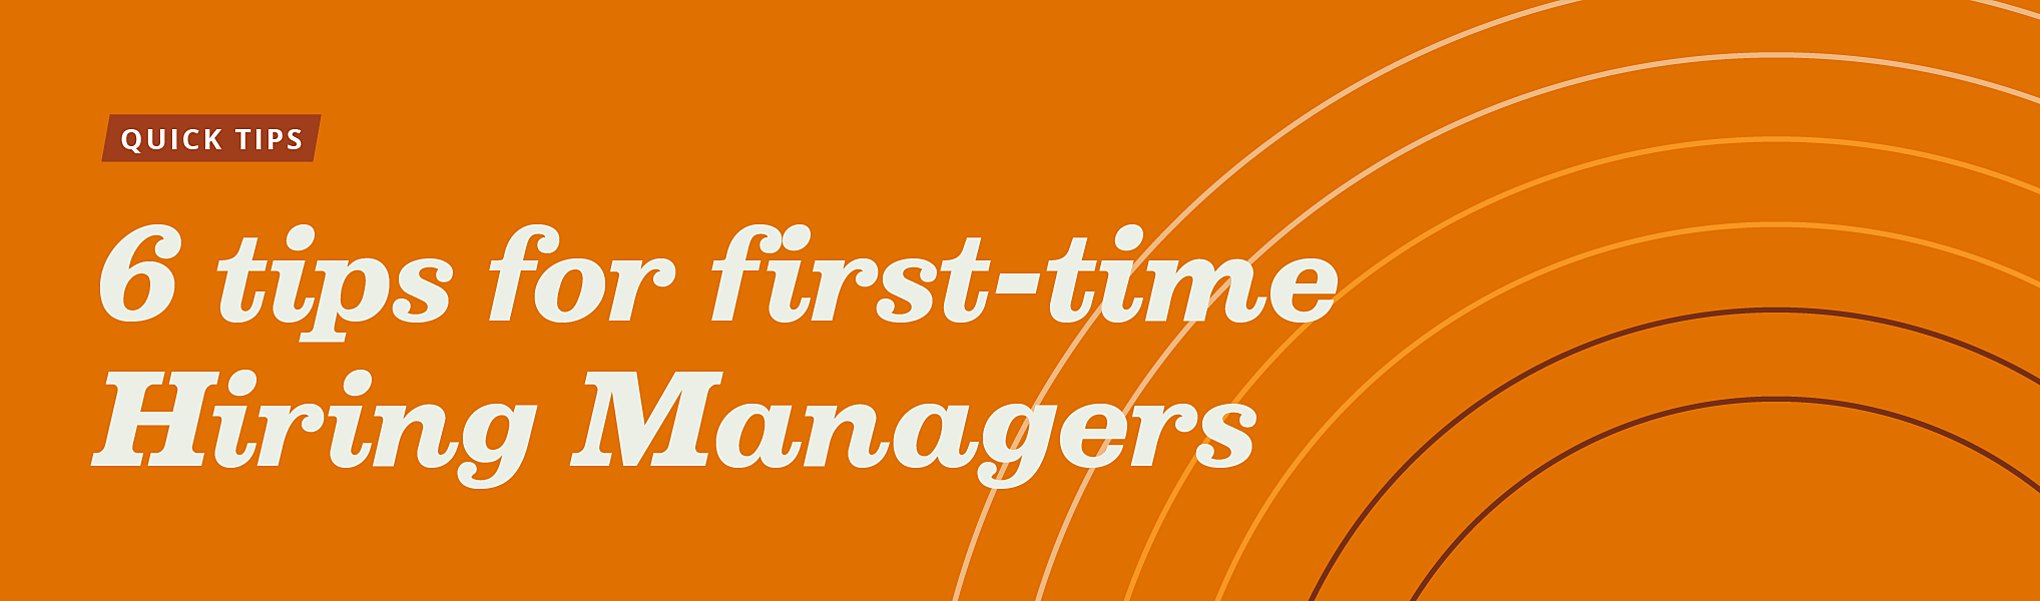 Abstract graphic in the background with "6 tips for first-time Hiring Managers" caption